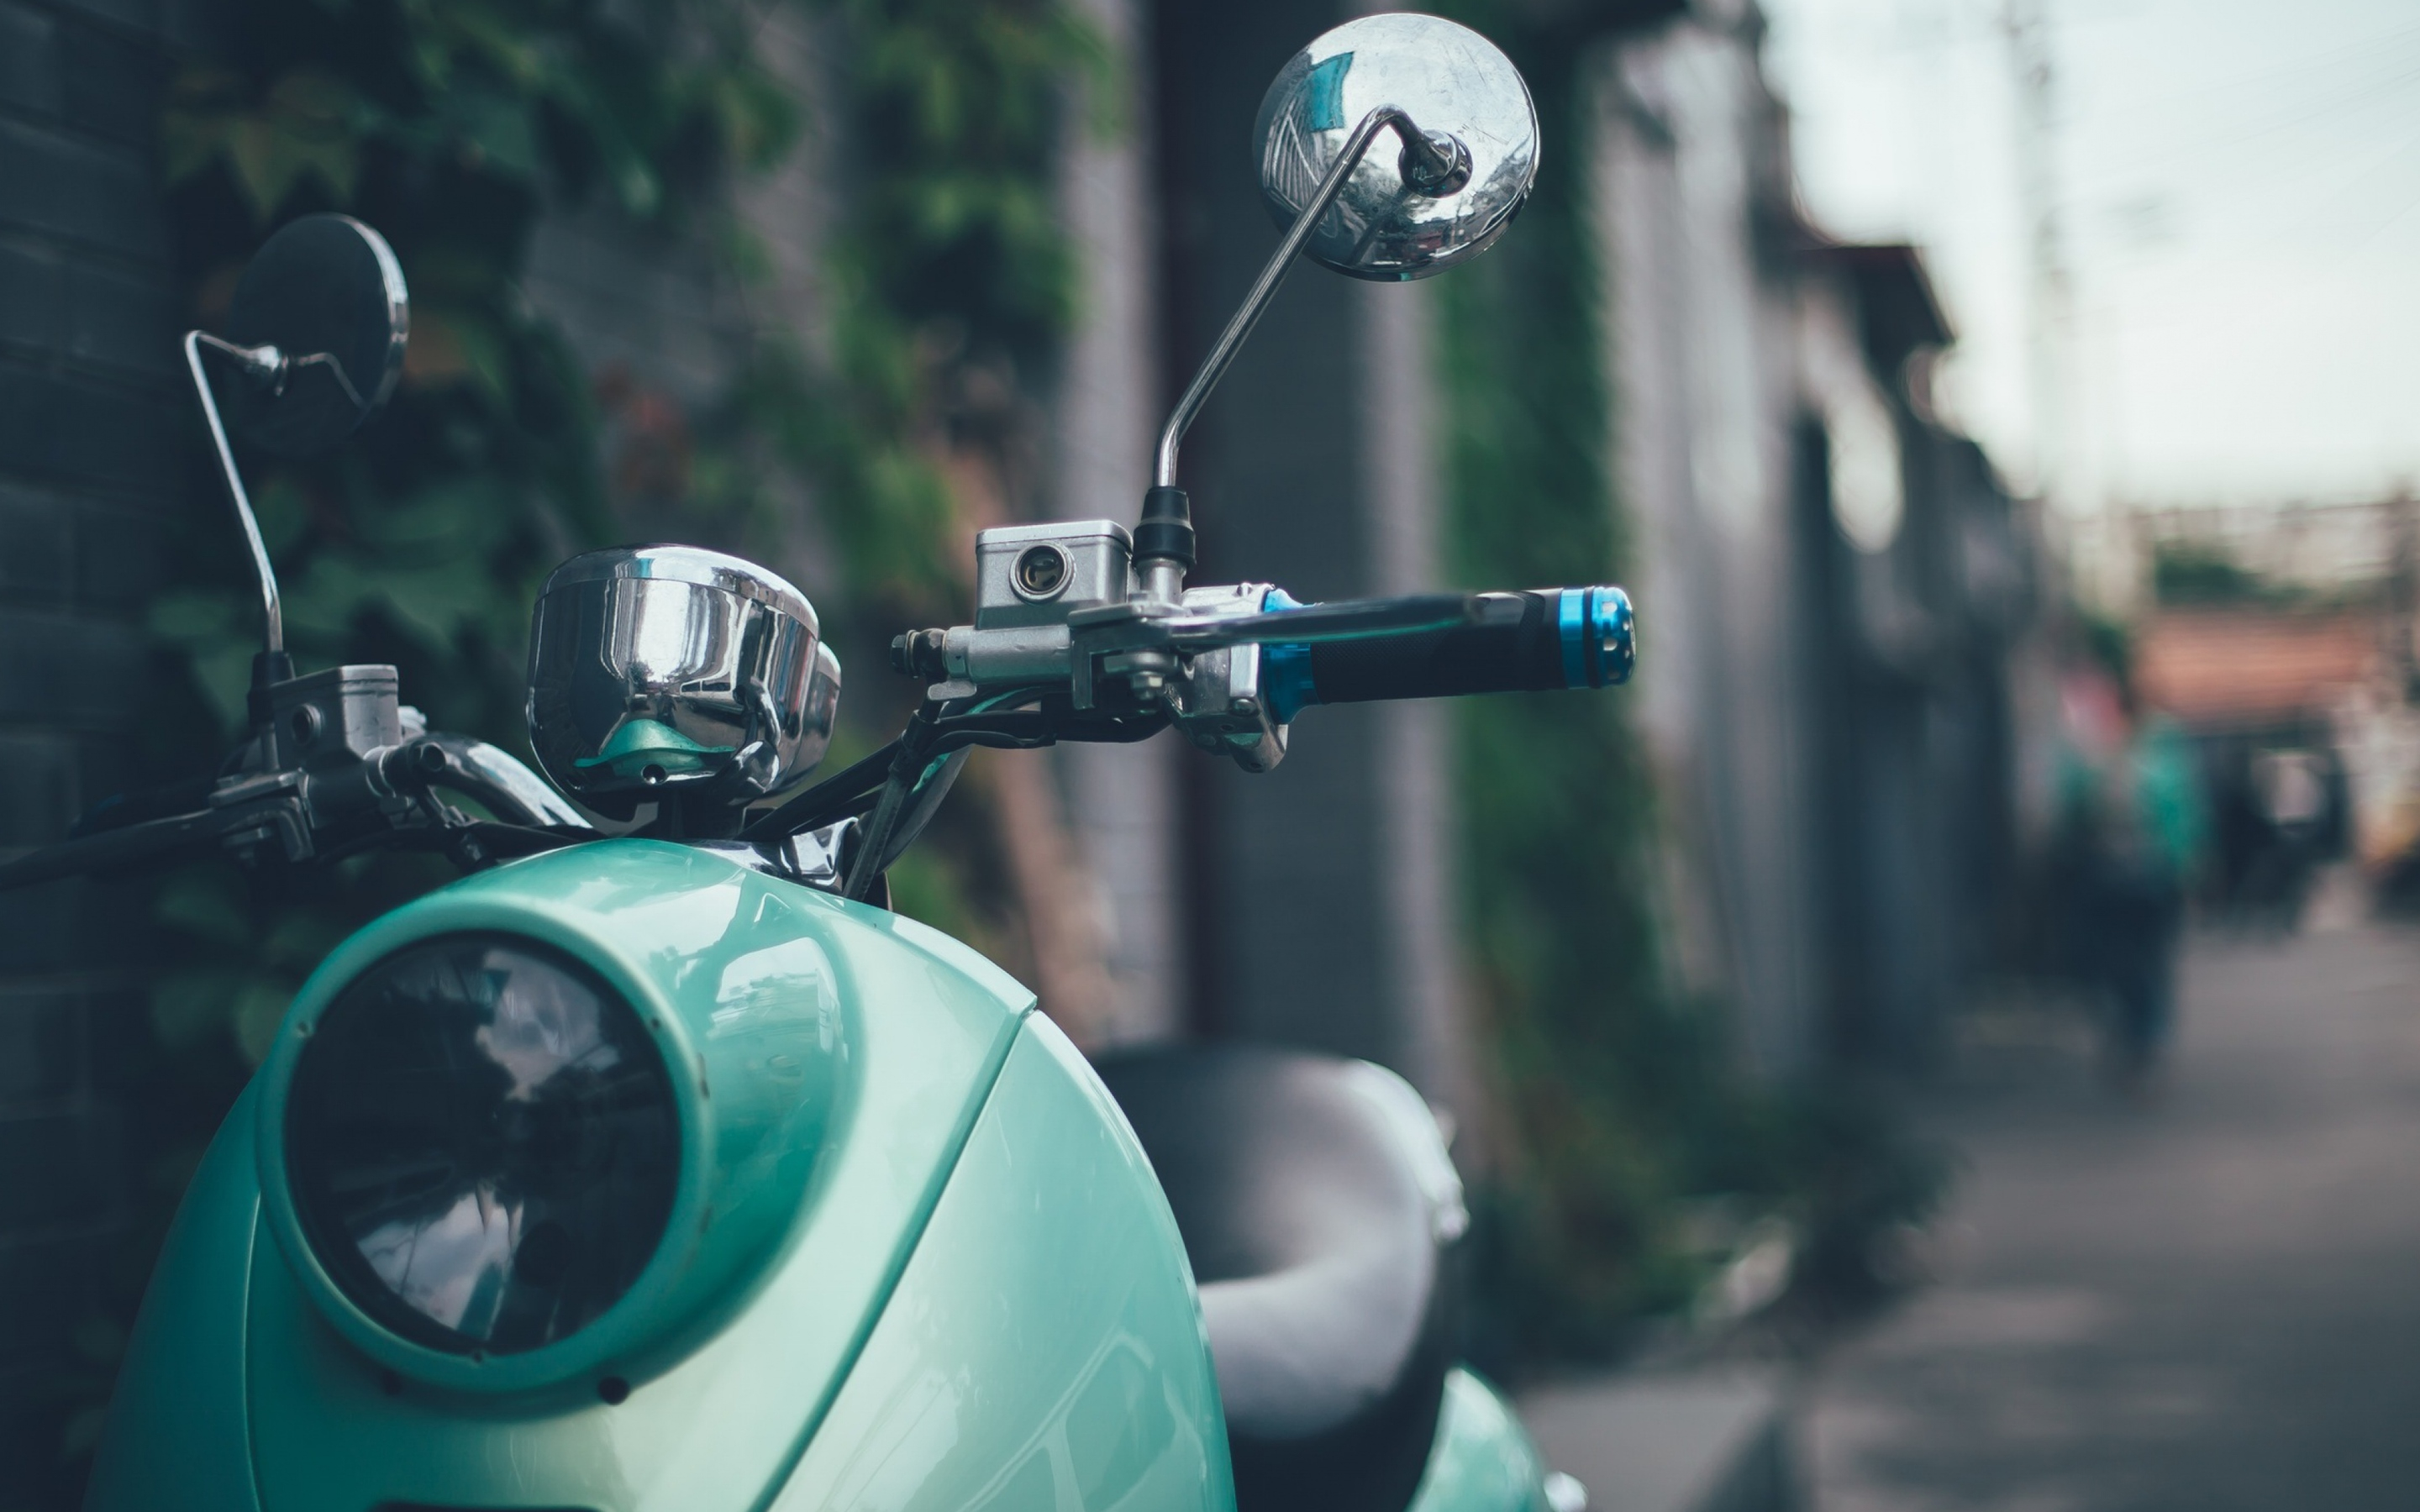 2880x1800 Vespa Scooter Vintage Macbook Pro Retina HD 4k Wallpapers, Images, Backgrounds, Photos and Pictures